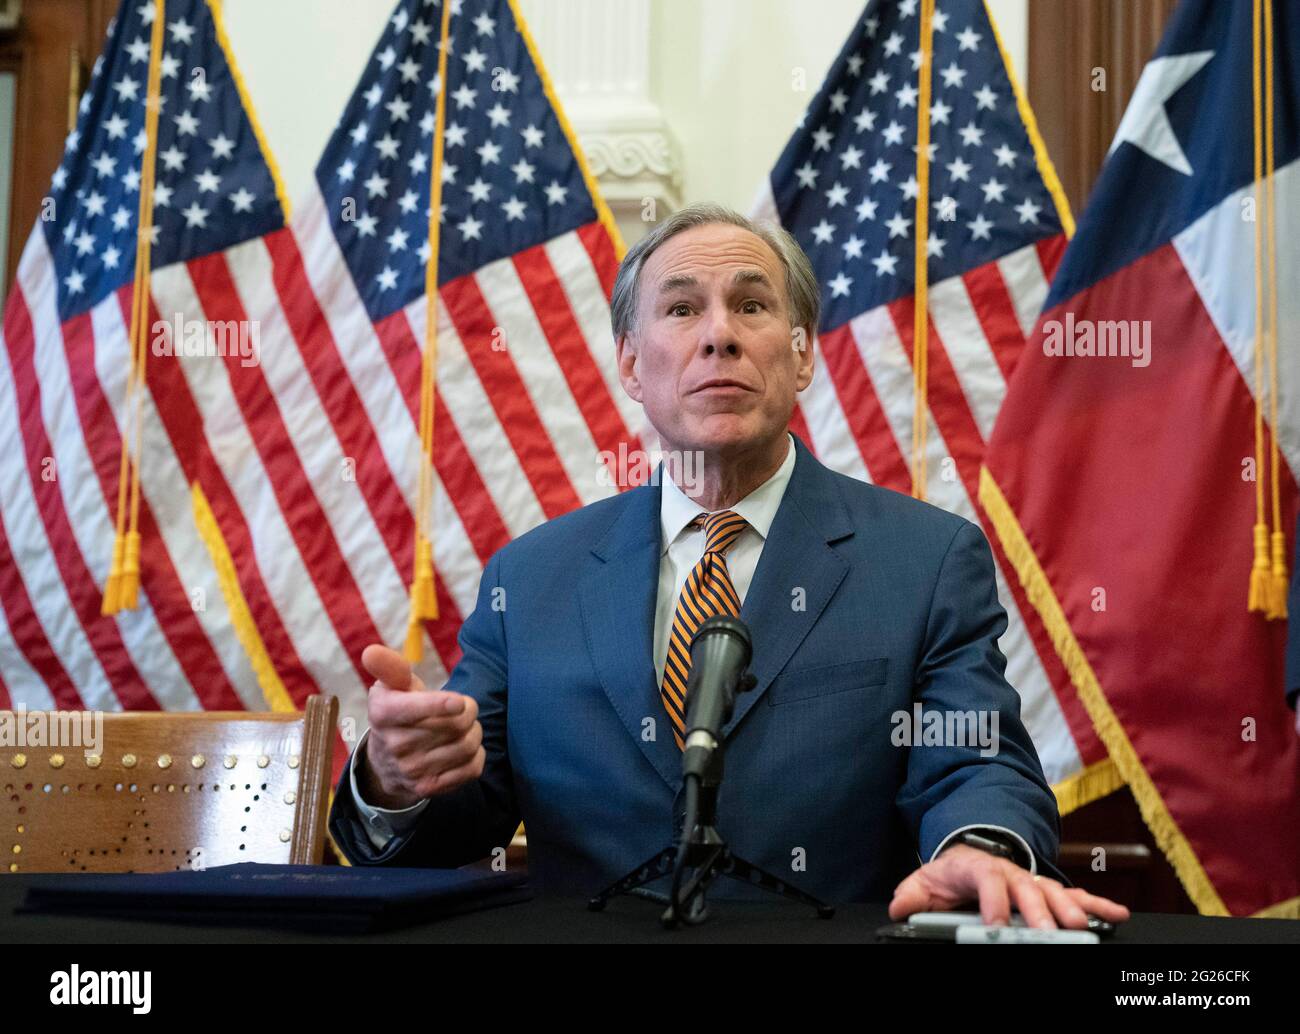 Austin, Texas USA, June 8 2021: Texas Gov. Greg Abbott talks to the press after signing two bills strengthening the Texas power grid and infrastructure that were emergency items on his legislative agenda during the recently completed legislative session. The bills were in response to February's winter storm that nearly knocked out the Texas power grid and left millions of Texans without power for days. Credit: Bob Daemmrich/Alamy Live News Stock Photo